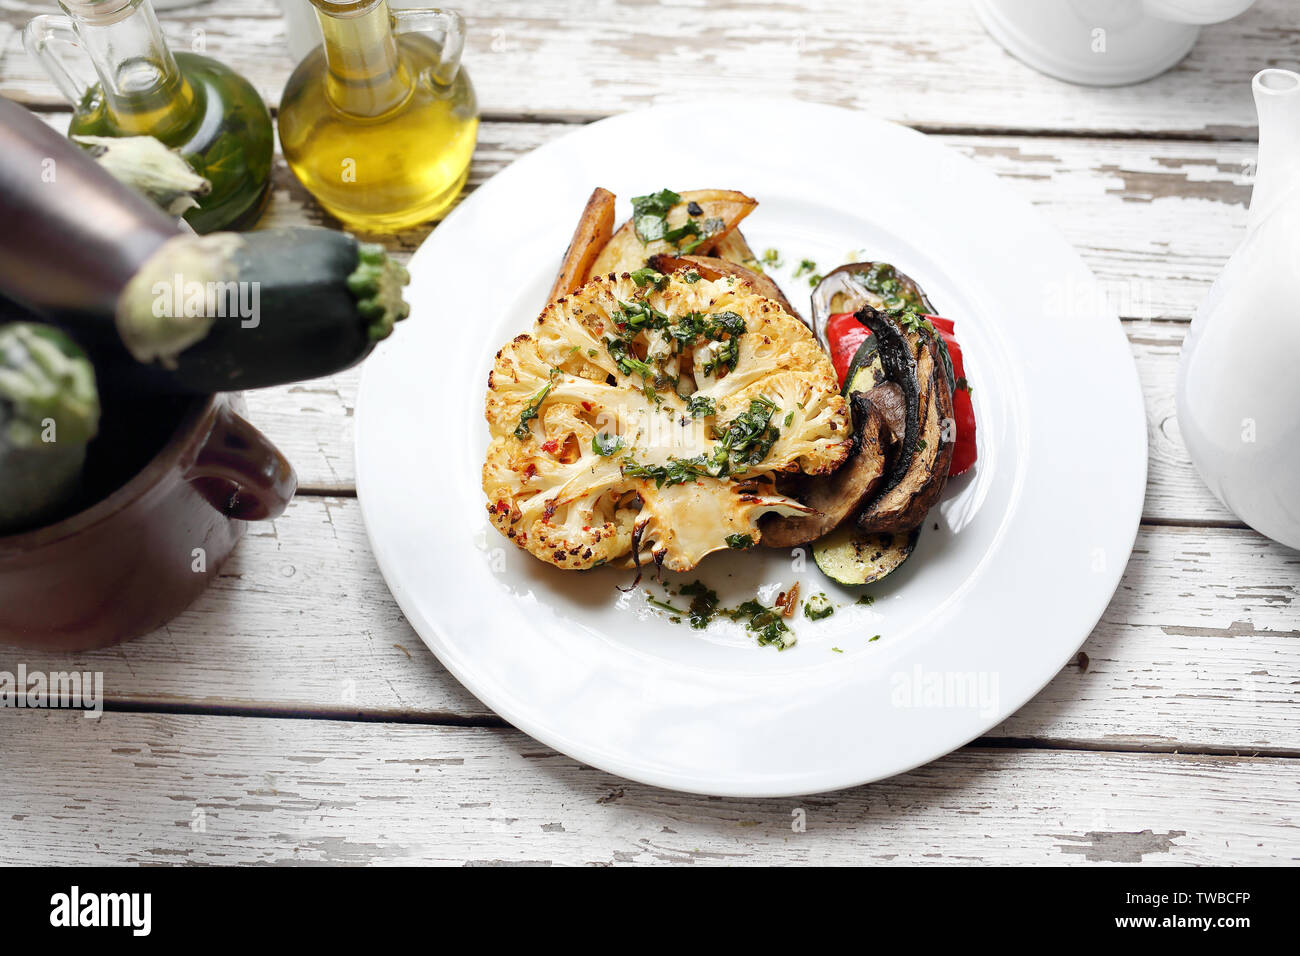 Vegetarian dish.  Baked cauliflower with mushrooms served with herbs. Stock Photo